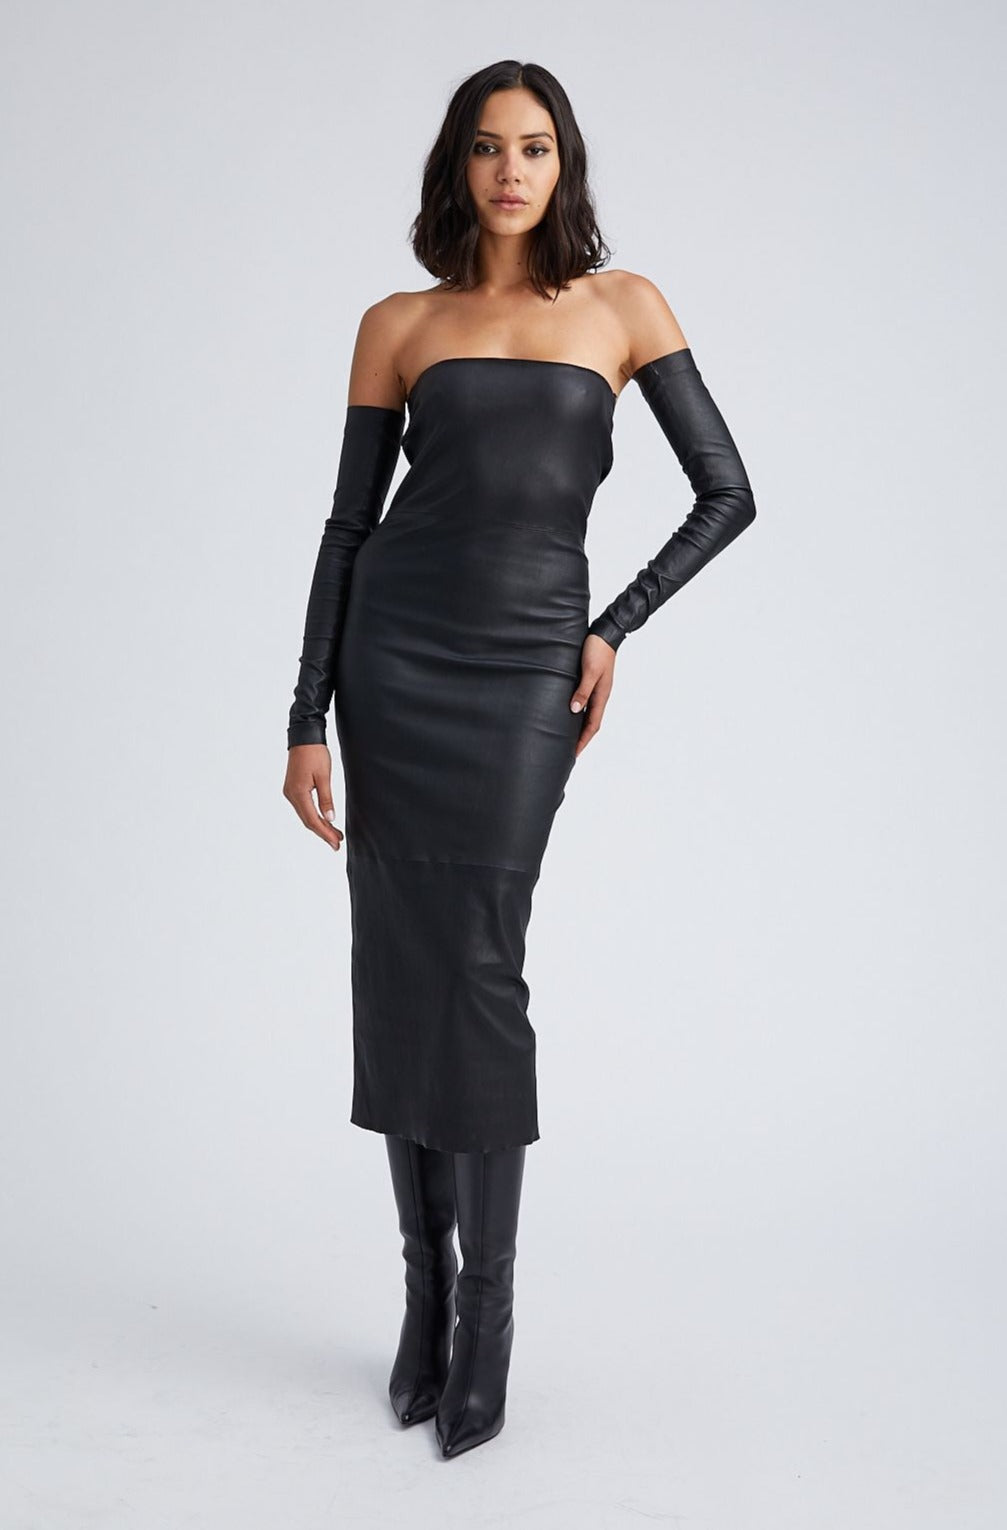 Black Leather Tube Dress With Sleeves